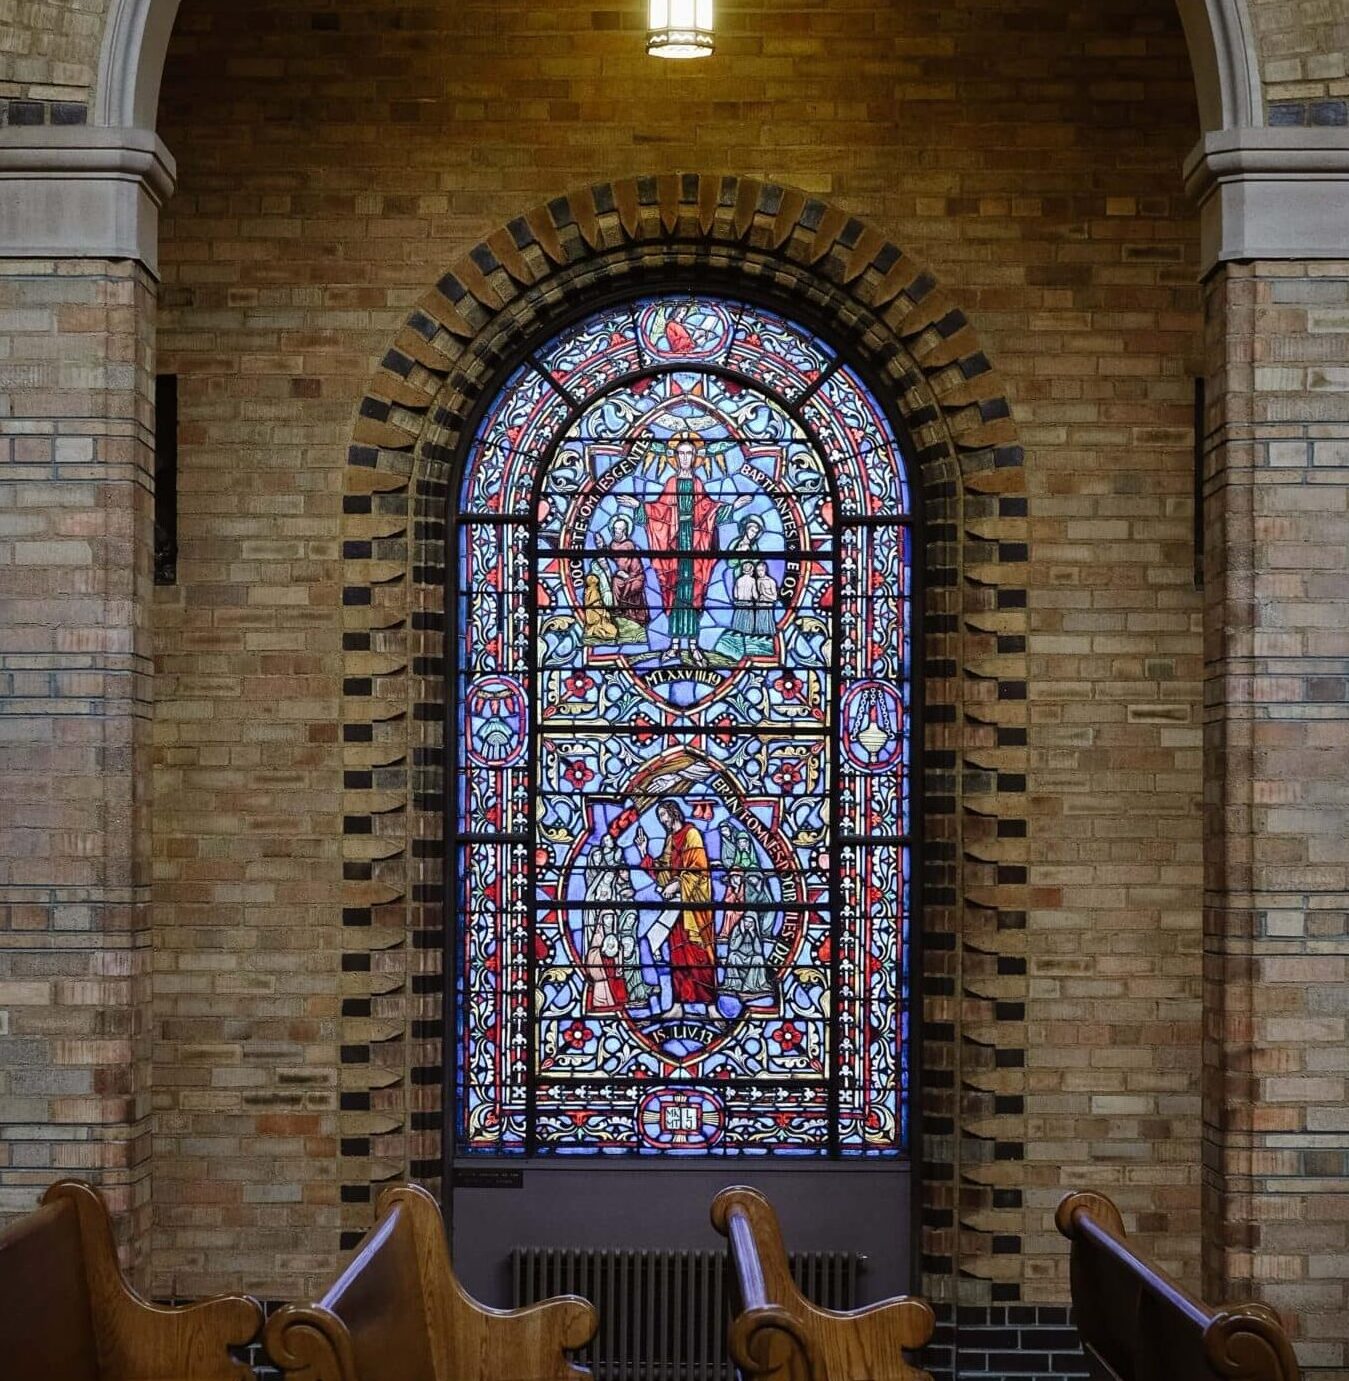 An arched stained glass window in the inside of a church with church pews in front of it